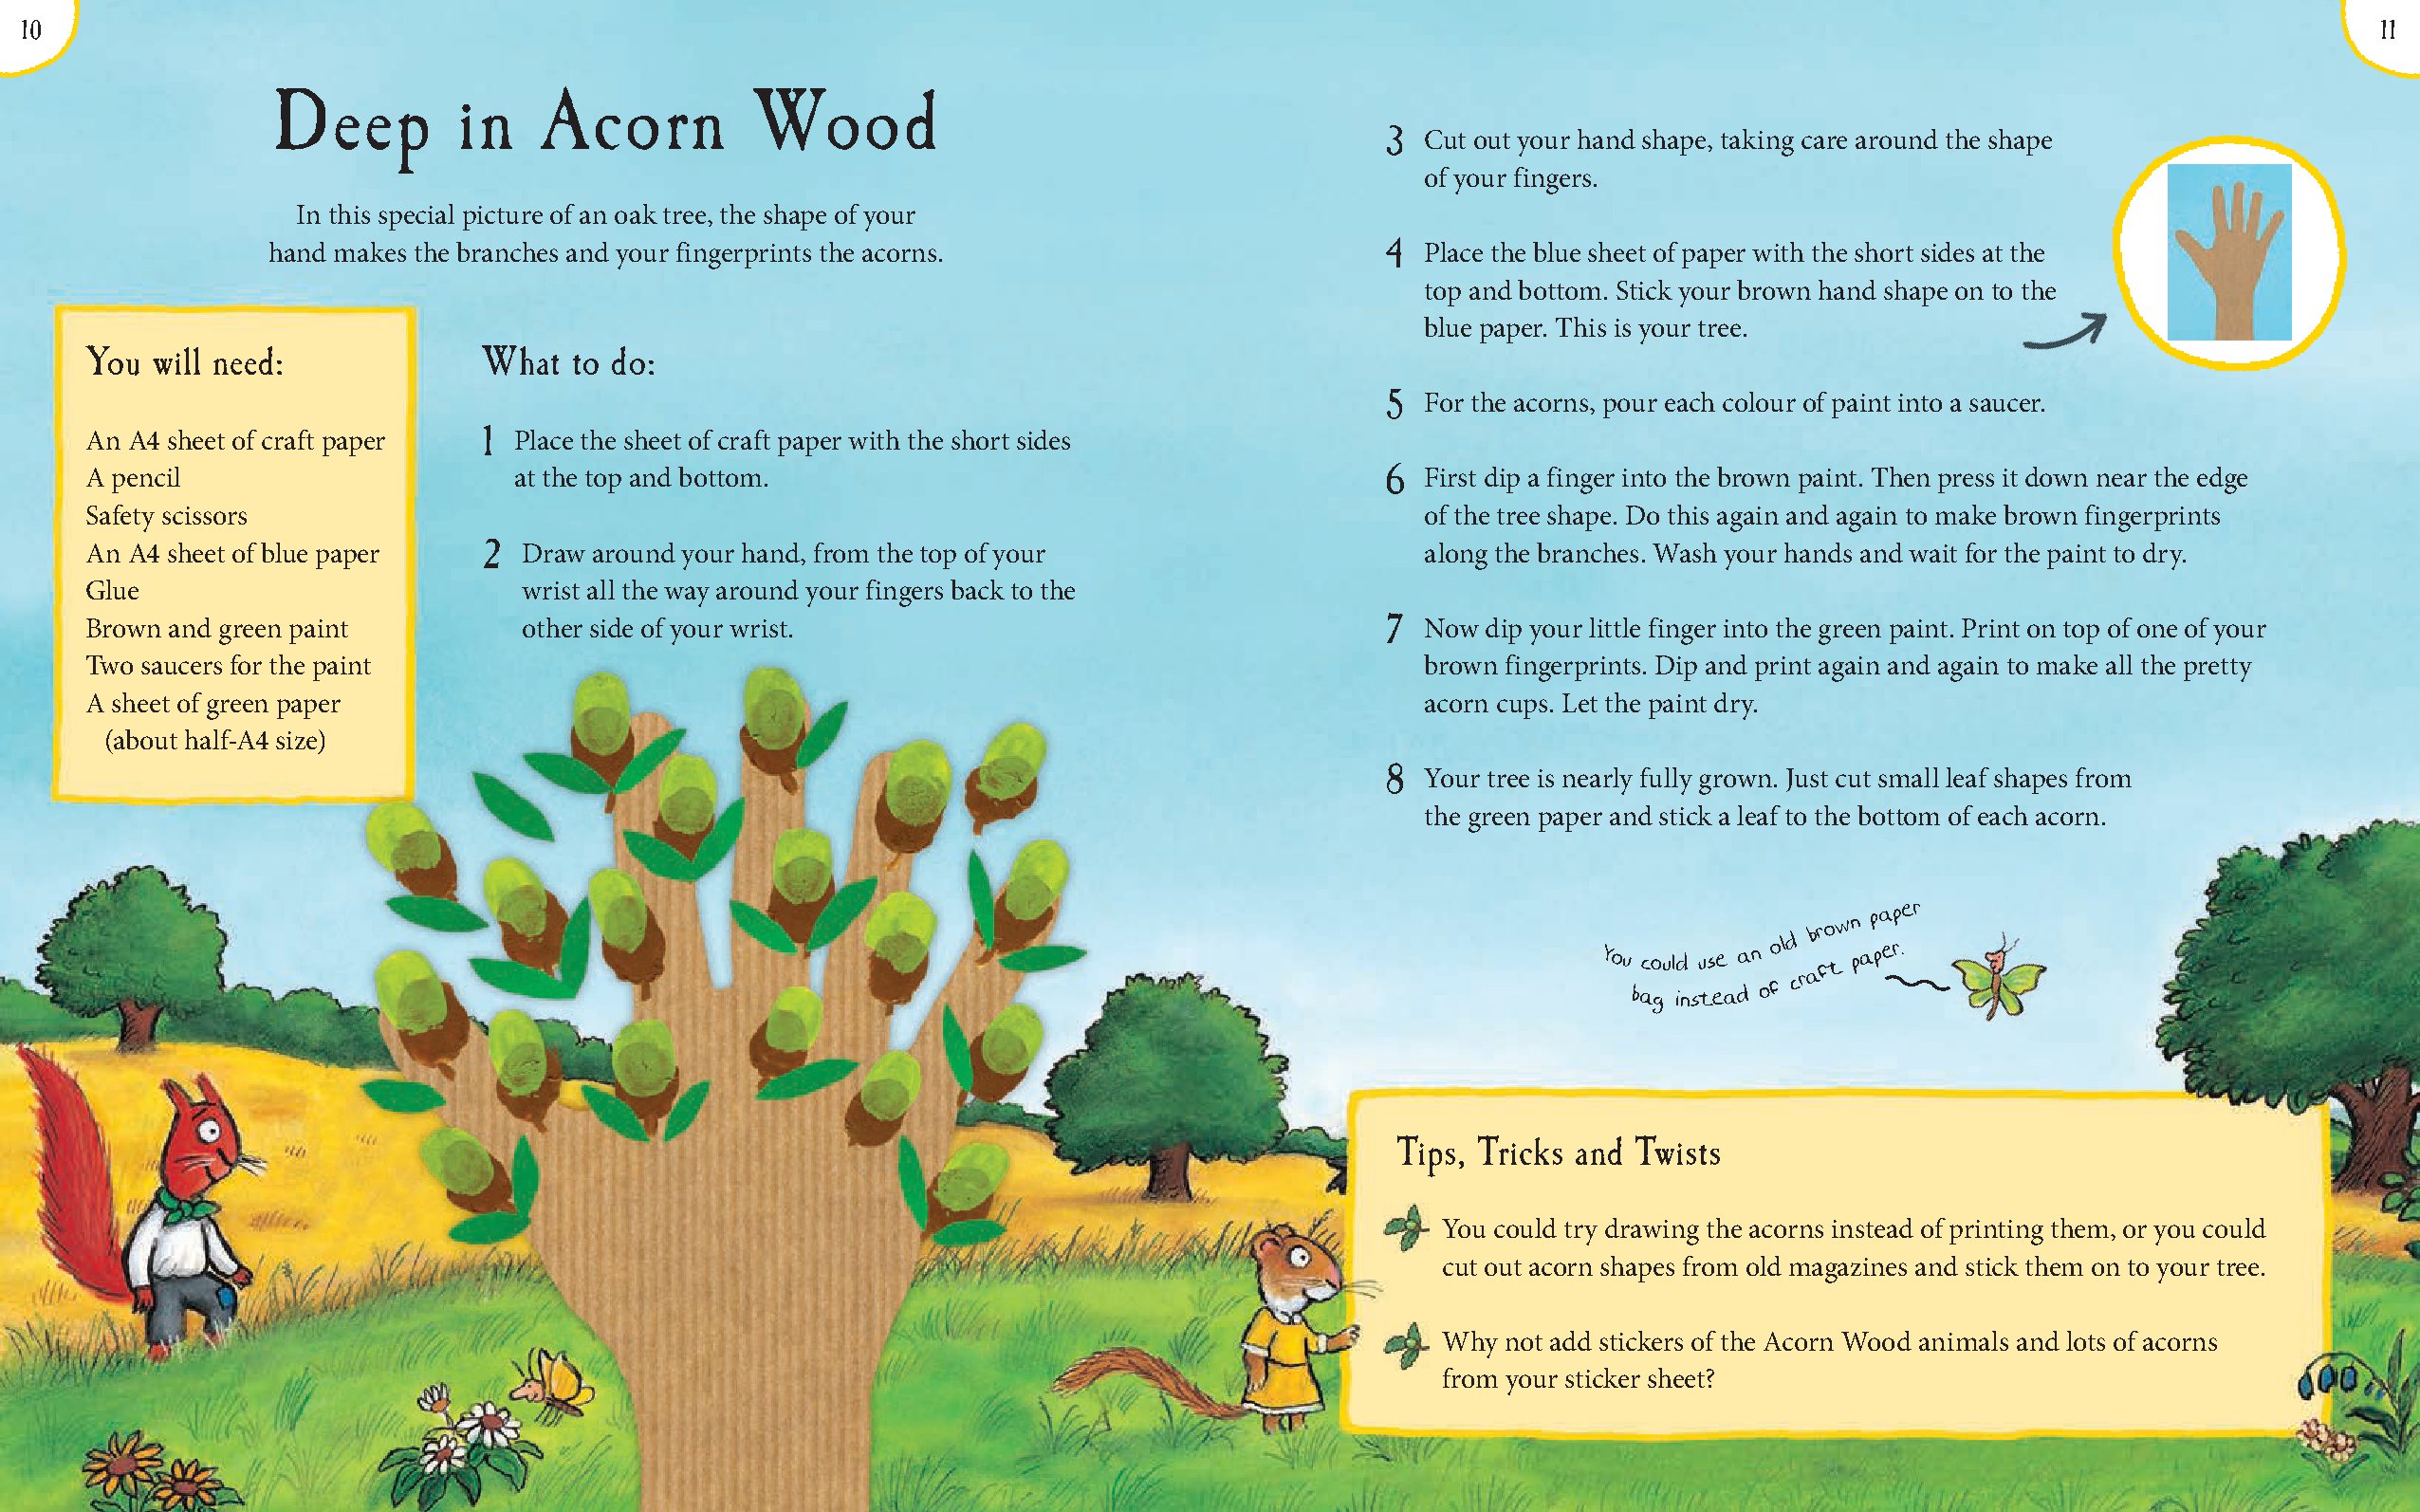 Tales from Acorn Wood: Make and Do Book